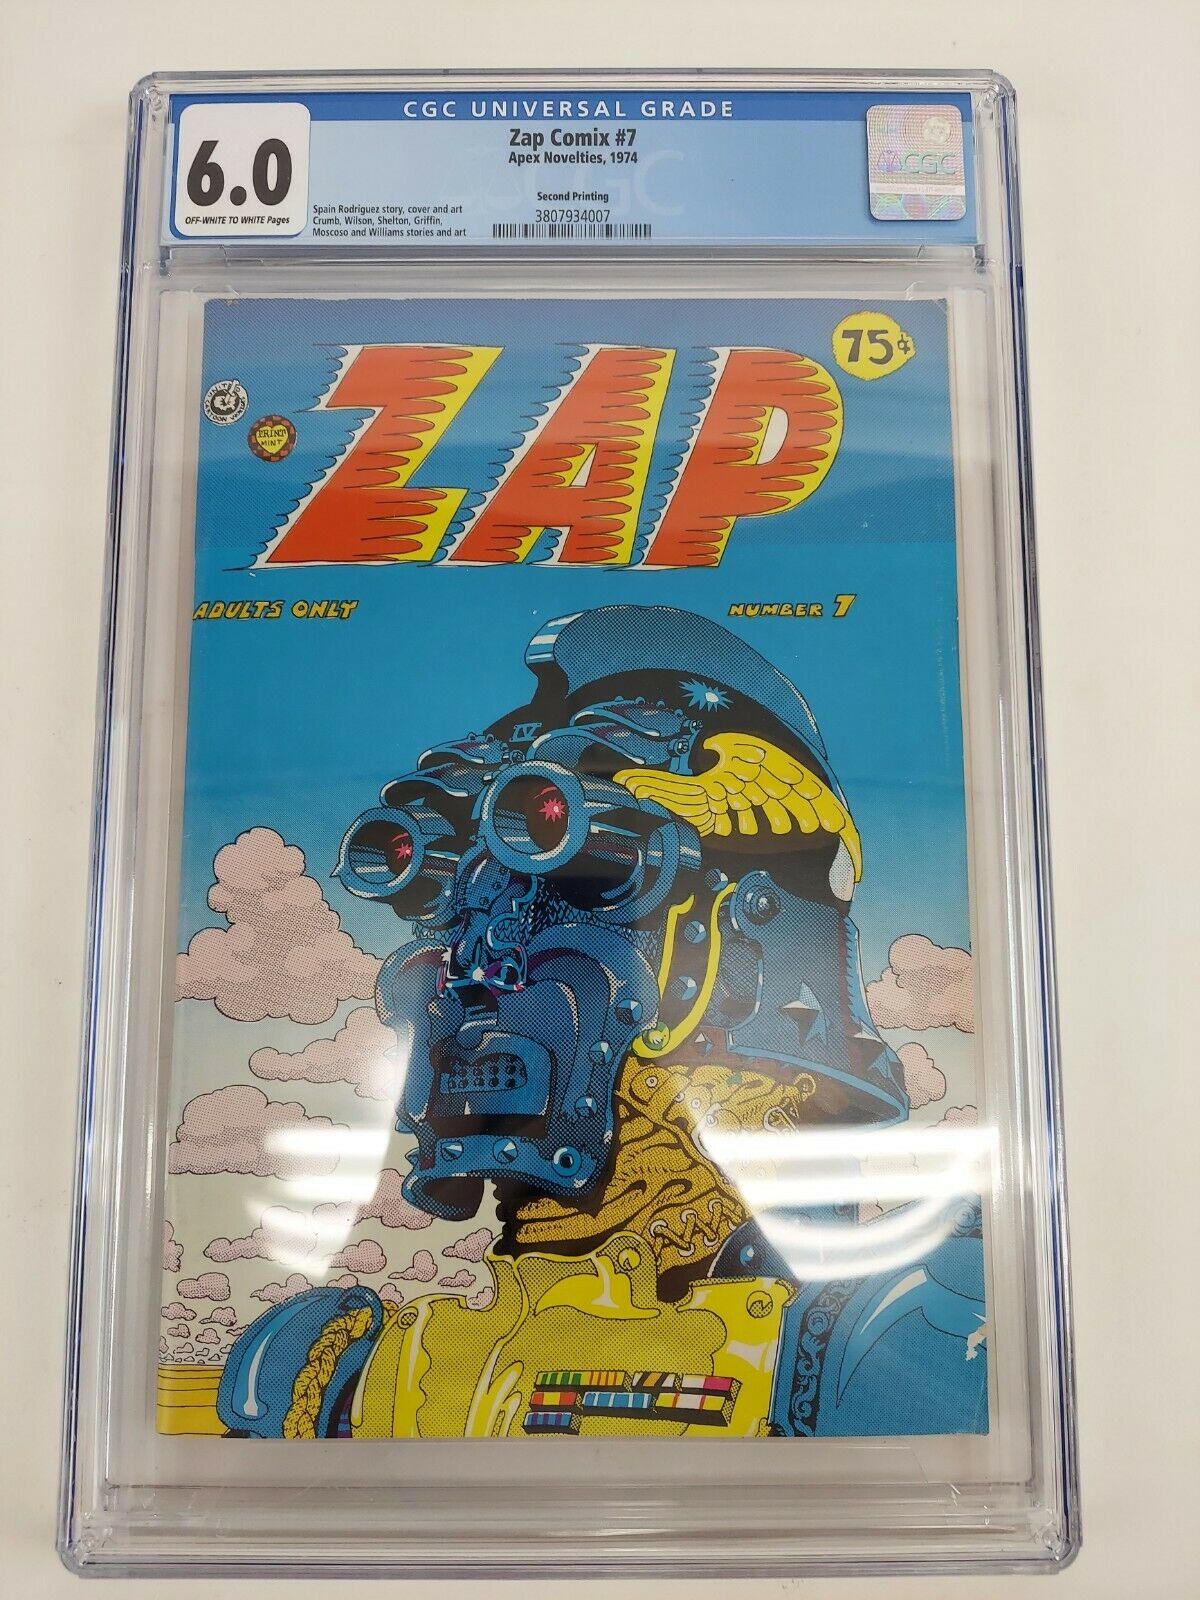 Zap Comix No. 7 CGC Graded 6.0 by Spain Rodriguez, Robert Crumb, S. Clay  Wilson, Victor Moscoso, Gilbert Shelton, Griffin